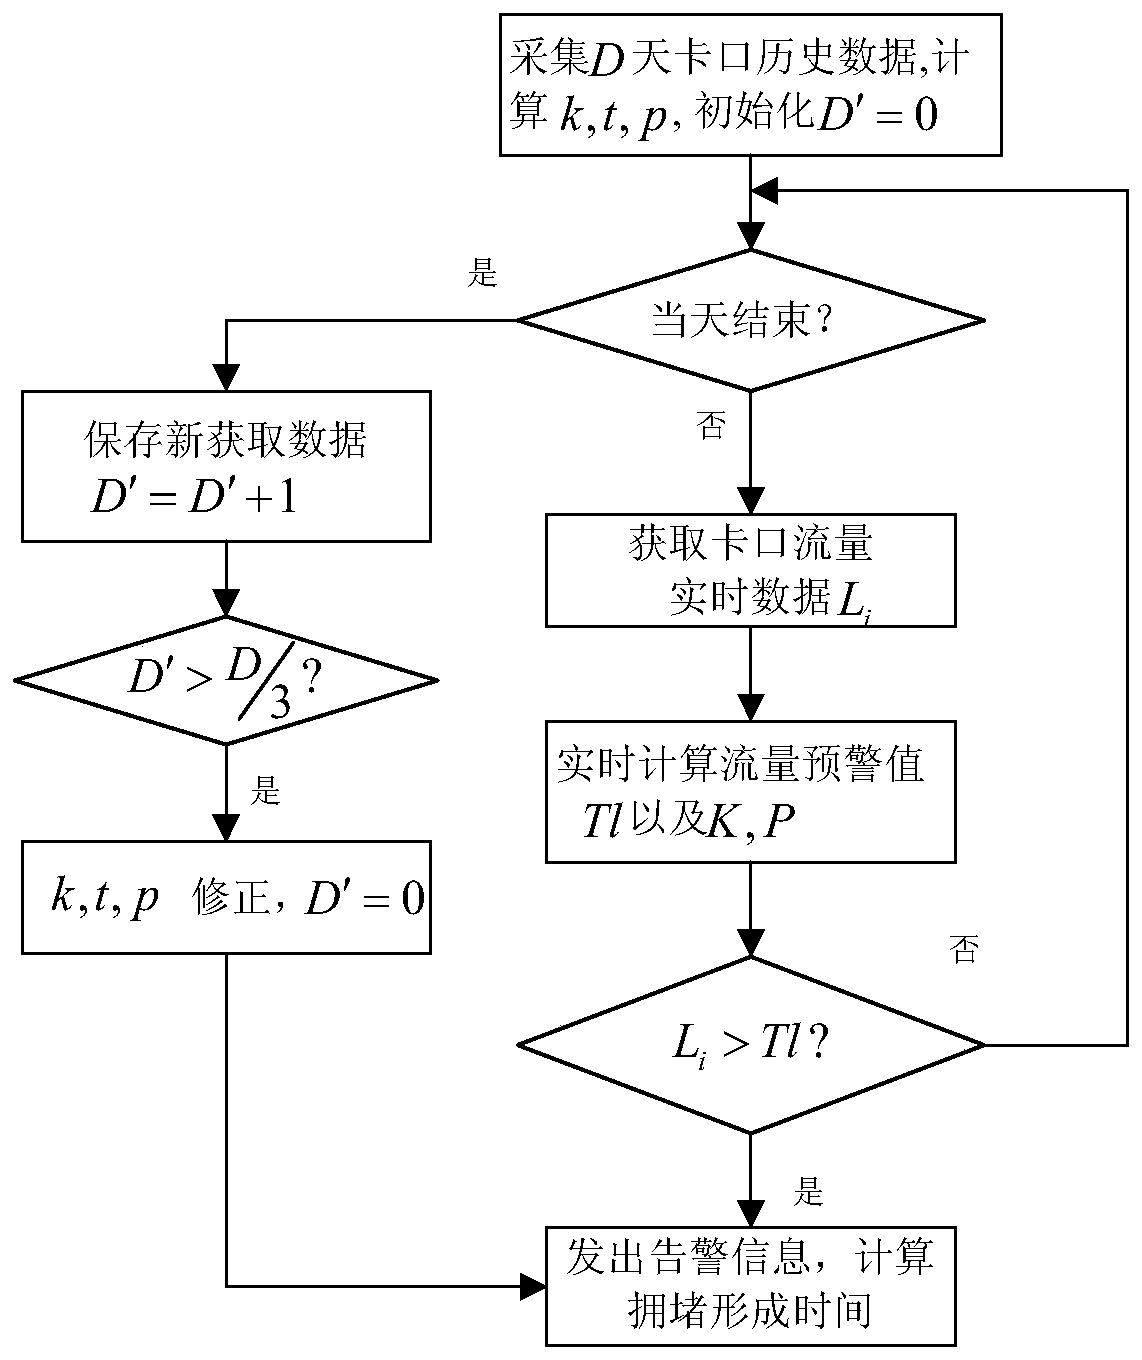 A road congestion early warning and congestion formation time prediction method